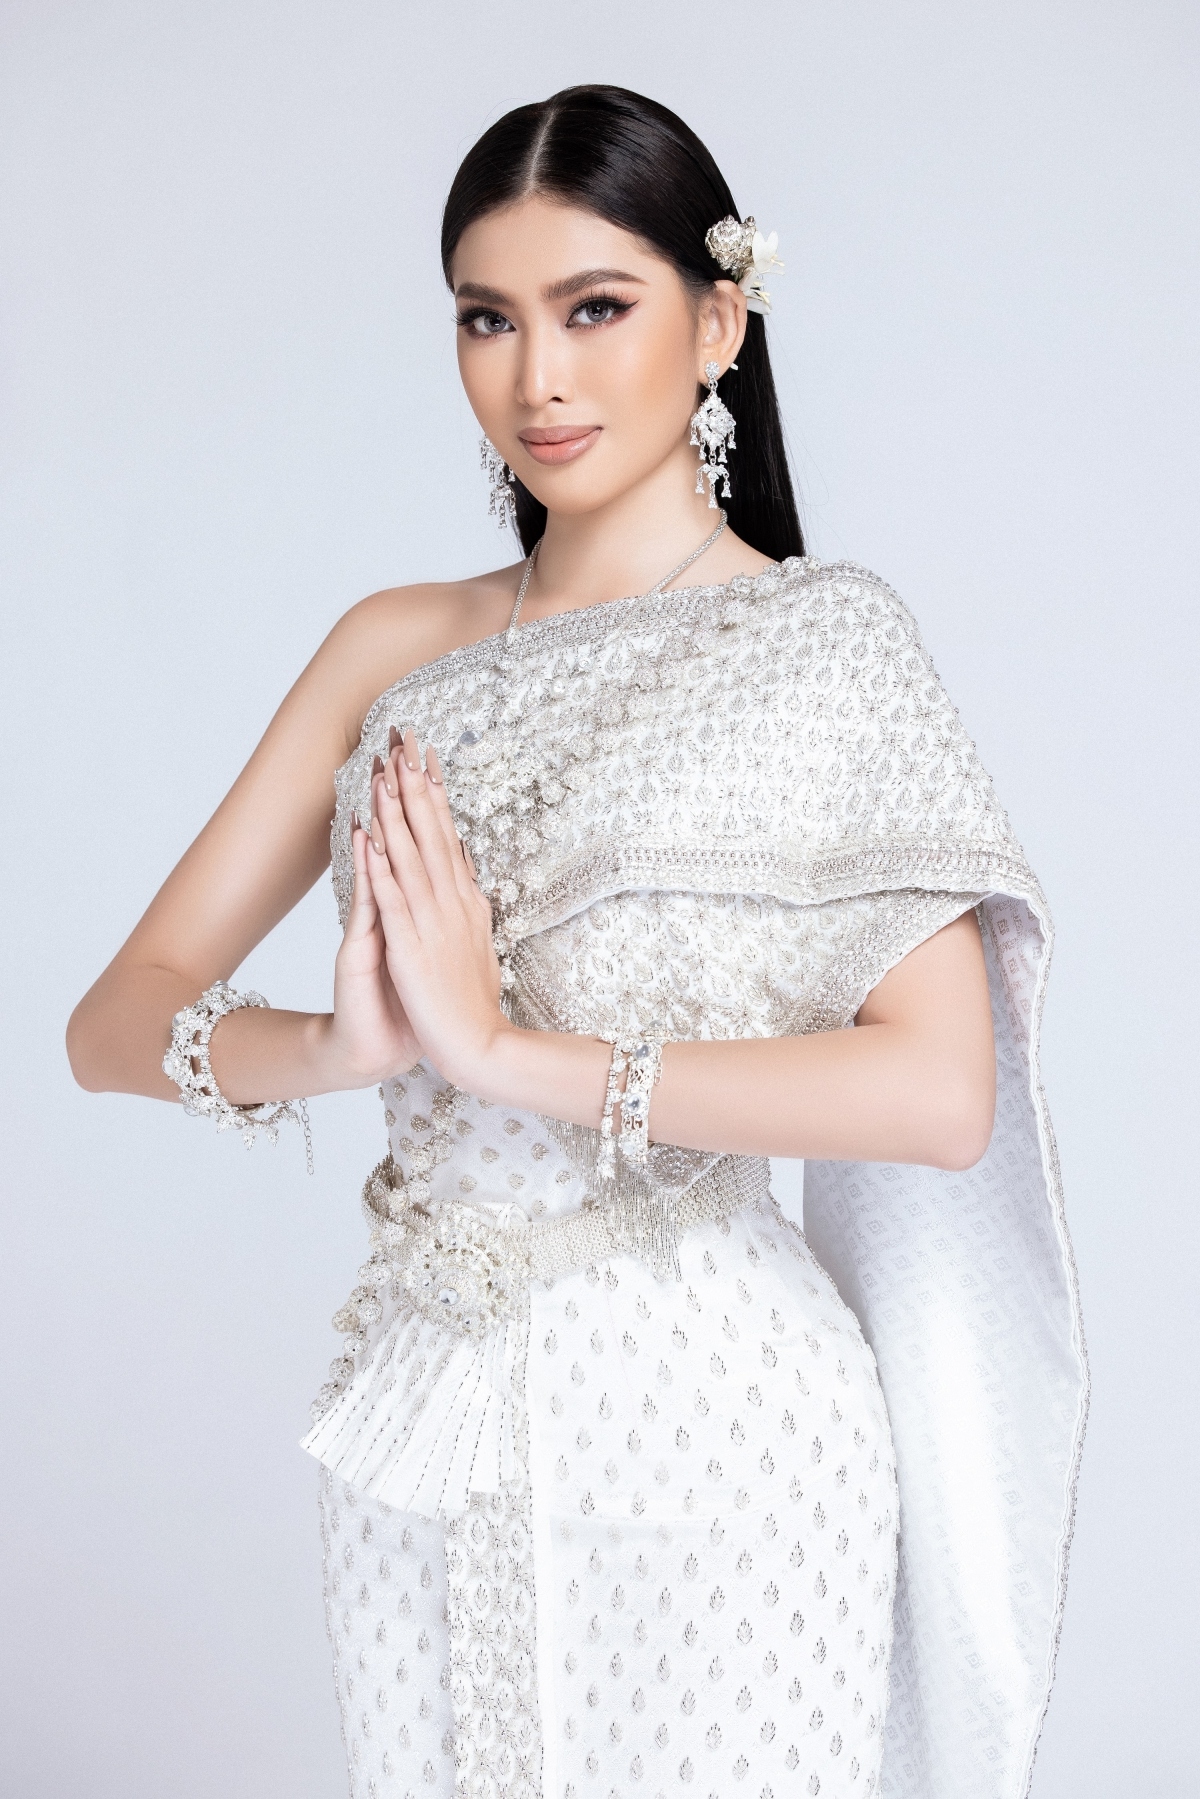 ngoc thao wows in thai costume picture 1